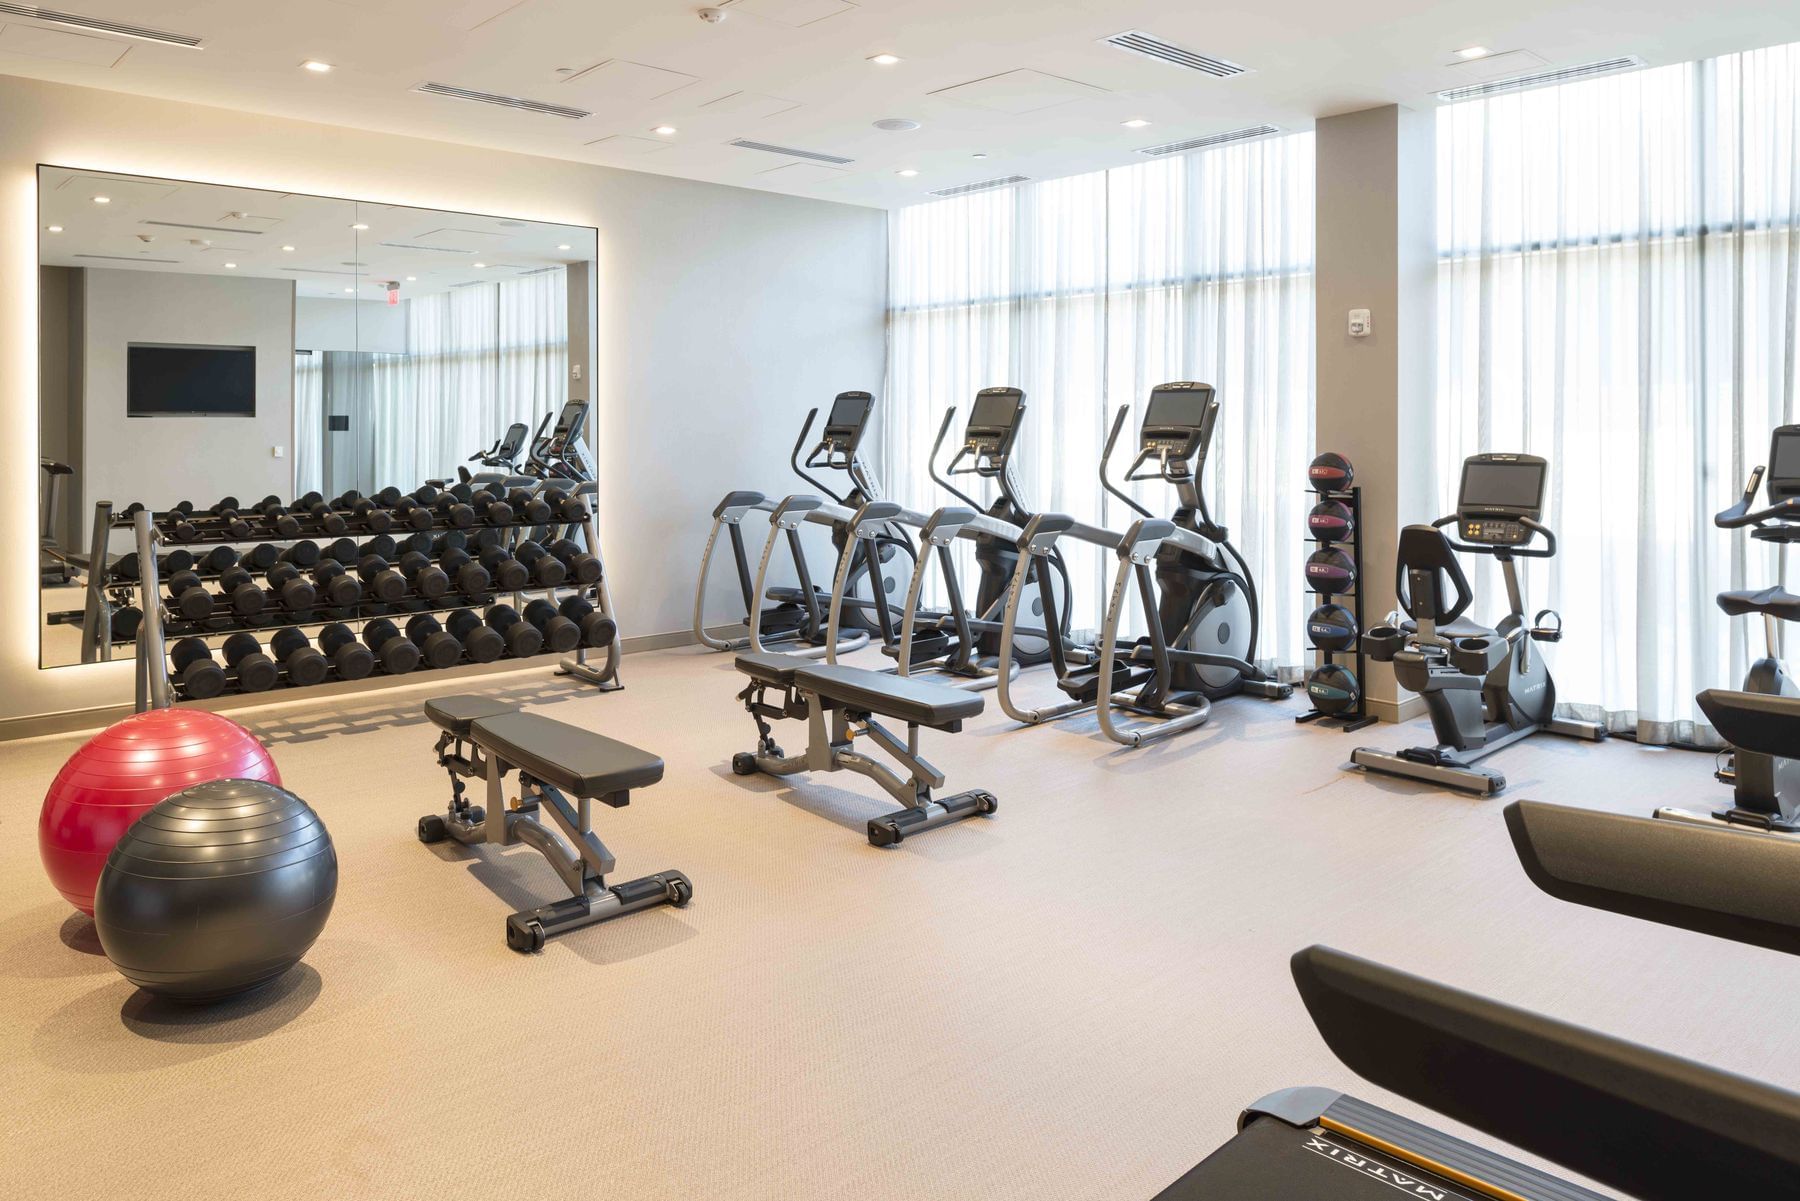 Fitness center with cardio equipment, free weights and stability